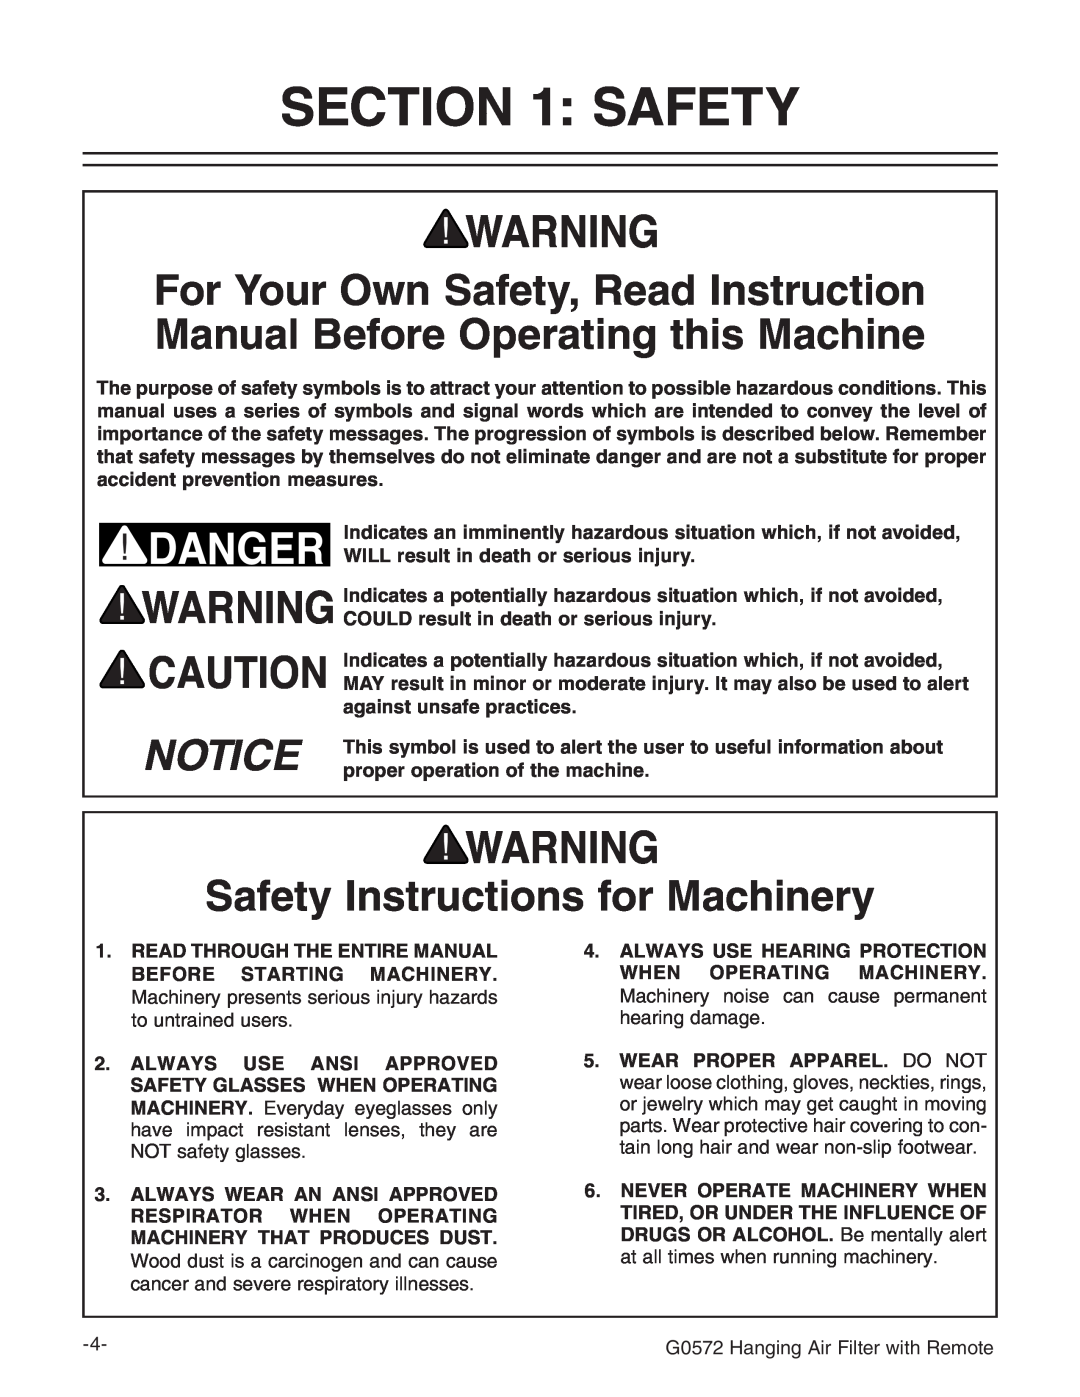 Grizzly G0572 instruction manual Notice, Safety Instructions for Machinery 